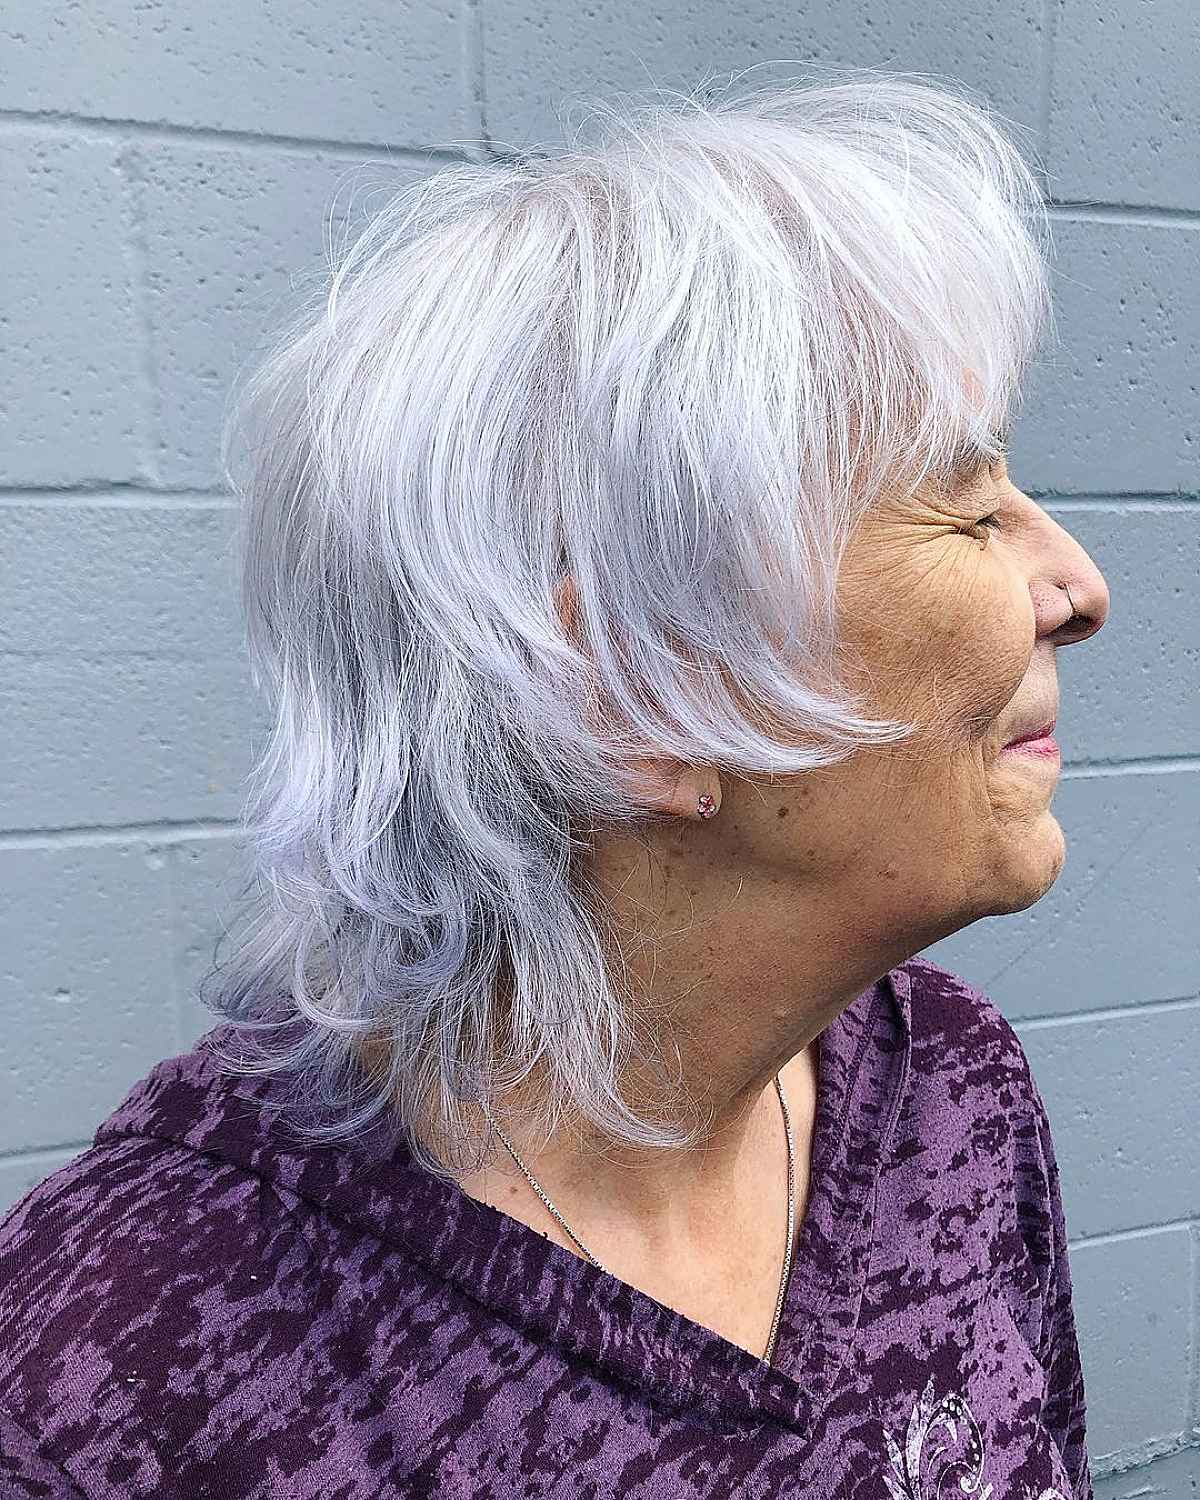 19 Shag Haircuts for Women Over 60 to Look and Feel Younger